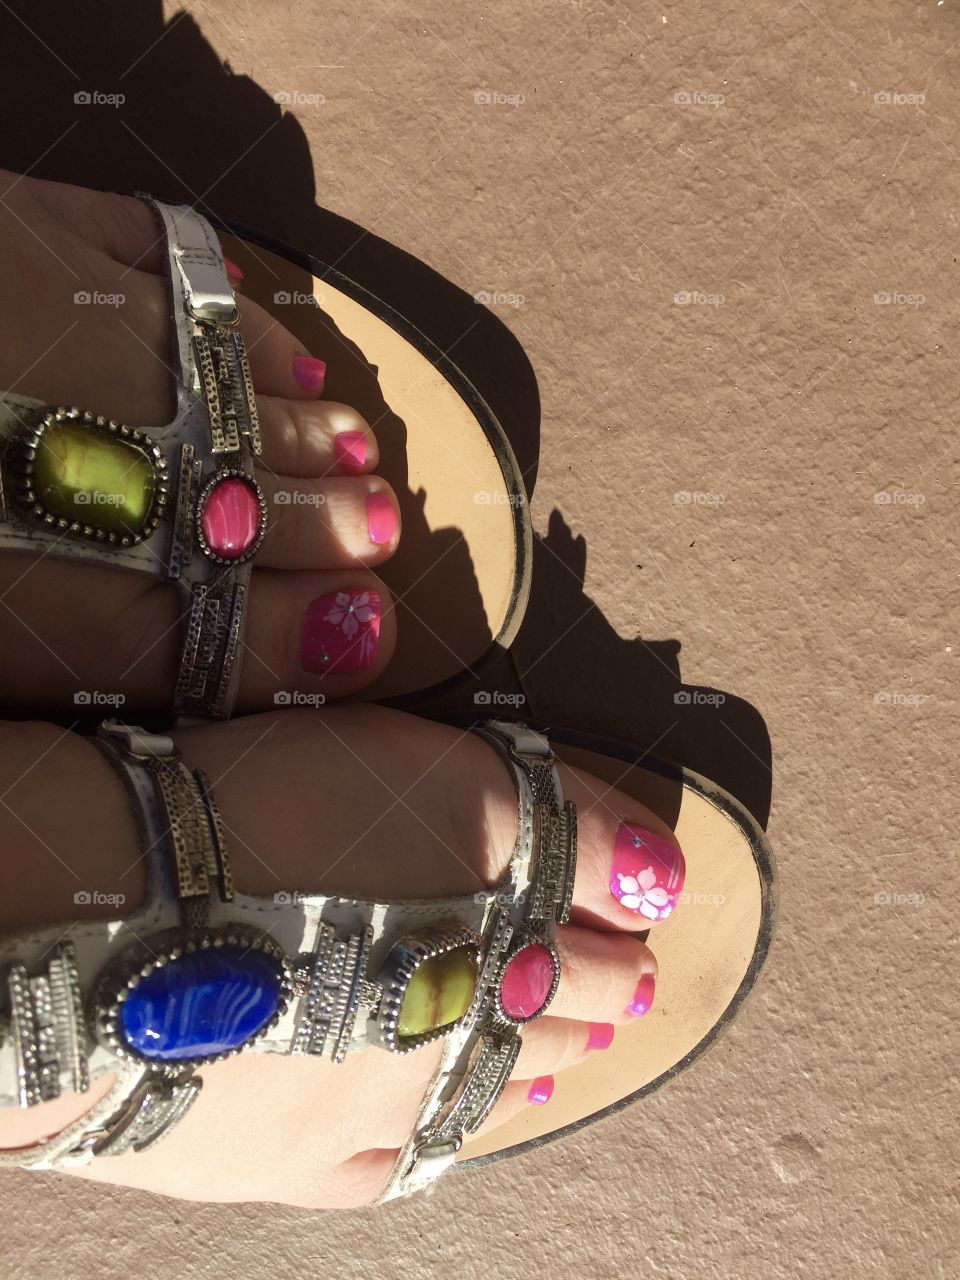 Summer! Pedicure and great sandals!